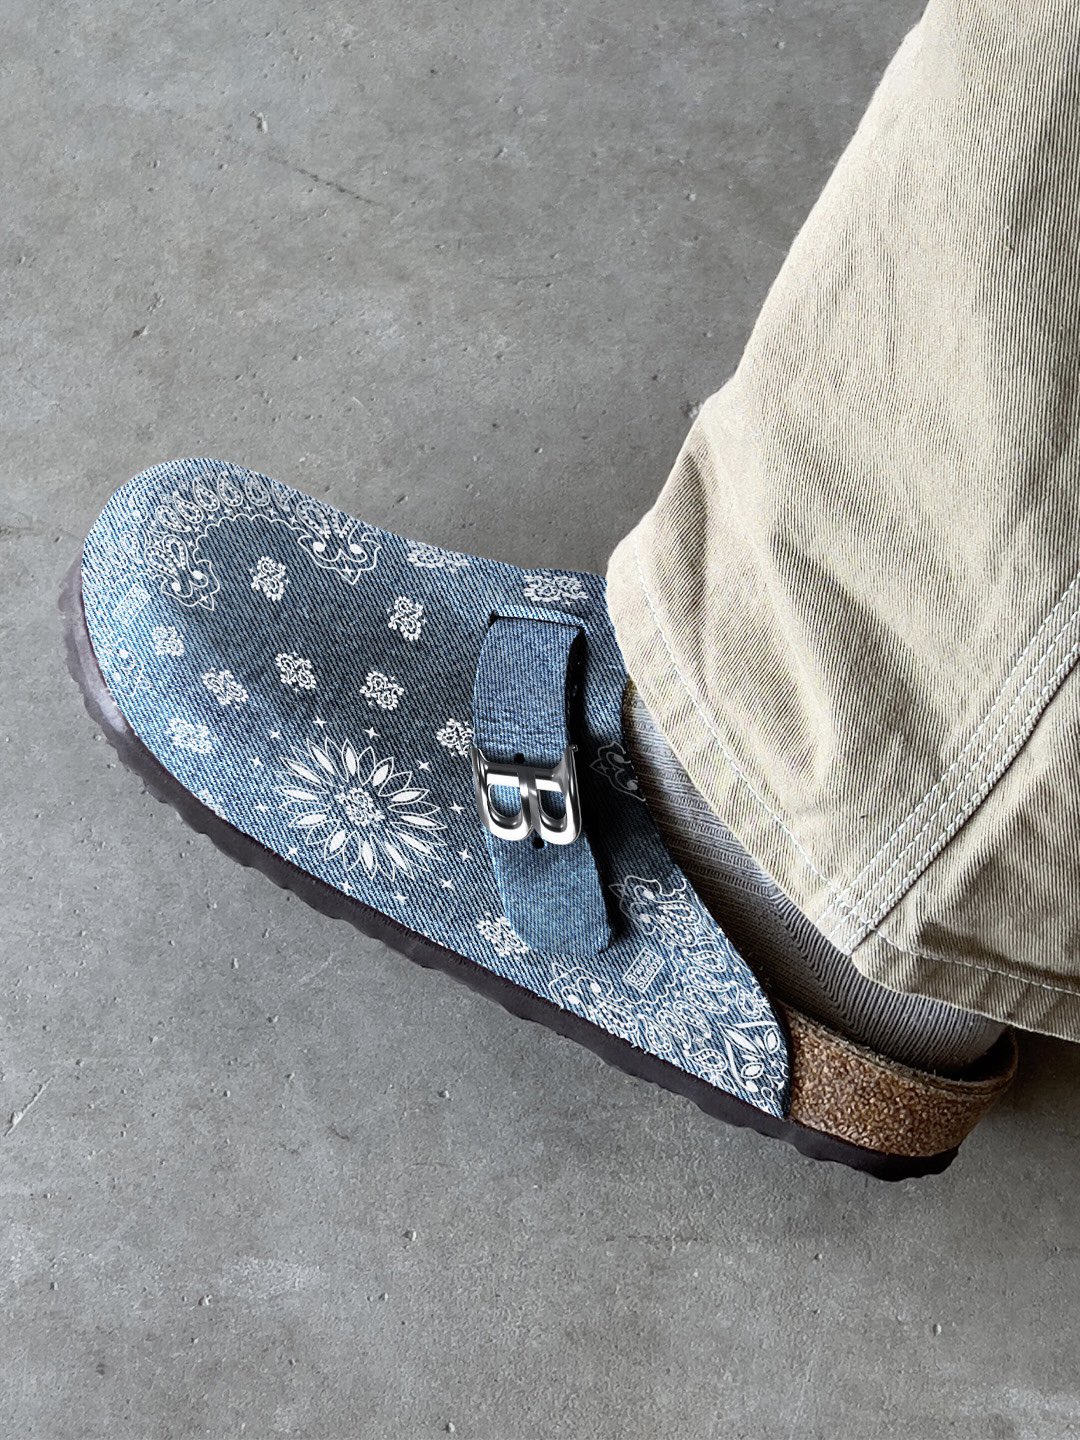 zSneakerHeadz on X: The @BravestStudios “Denim Paisley” mules are set to  drop on Friday (9/29) at 2PM EST. Drop Alerts:    / X